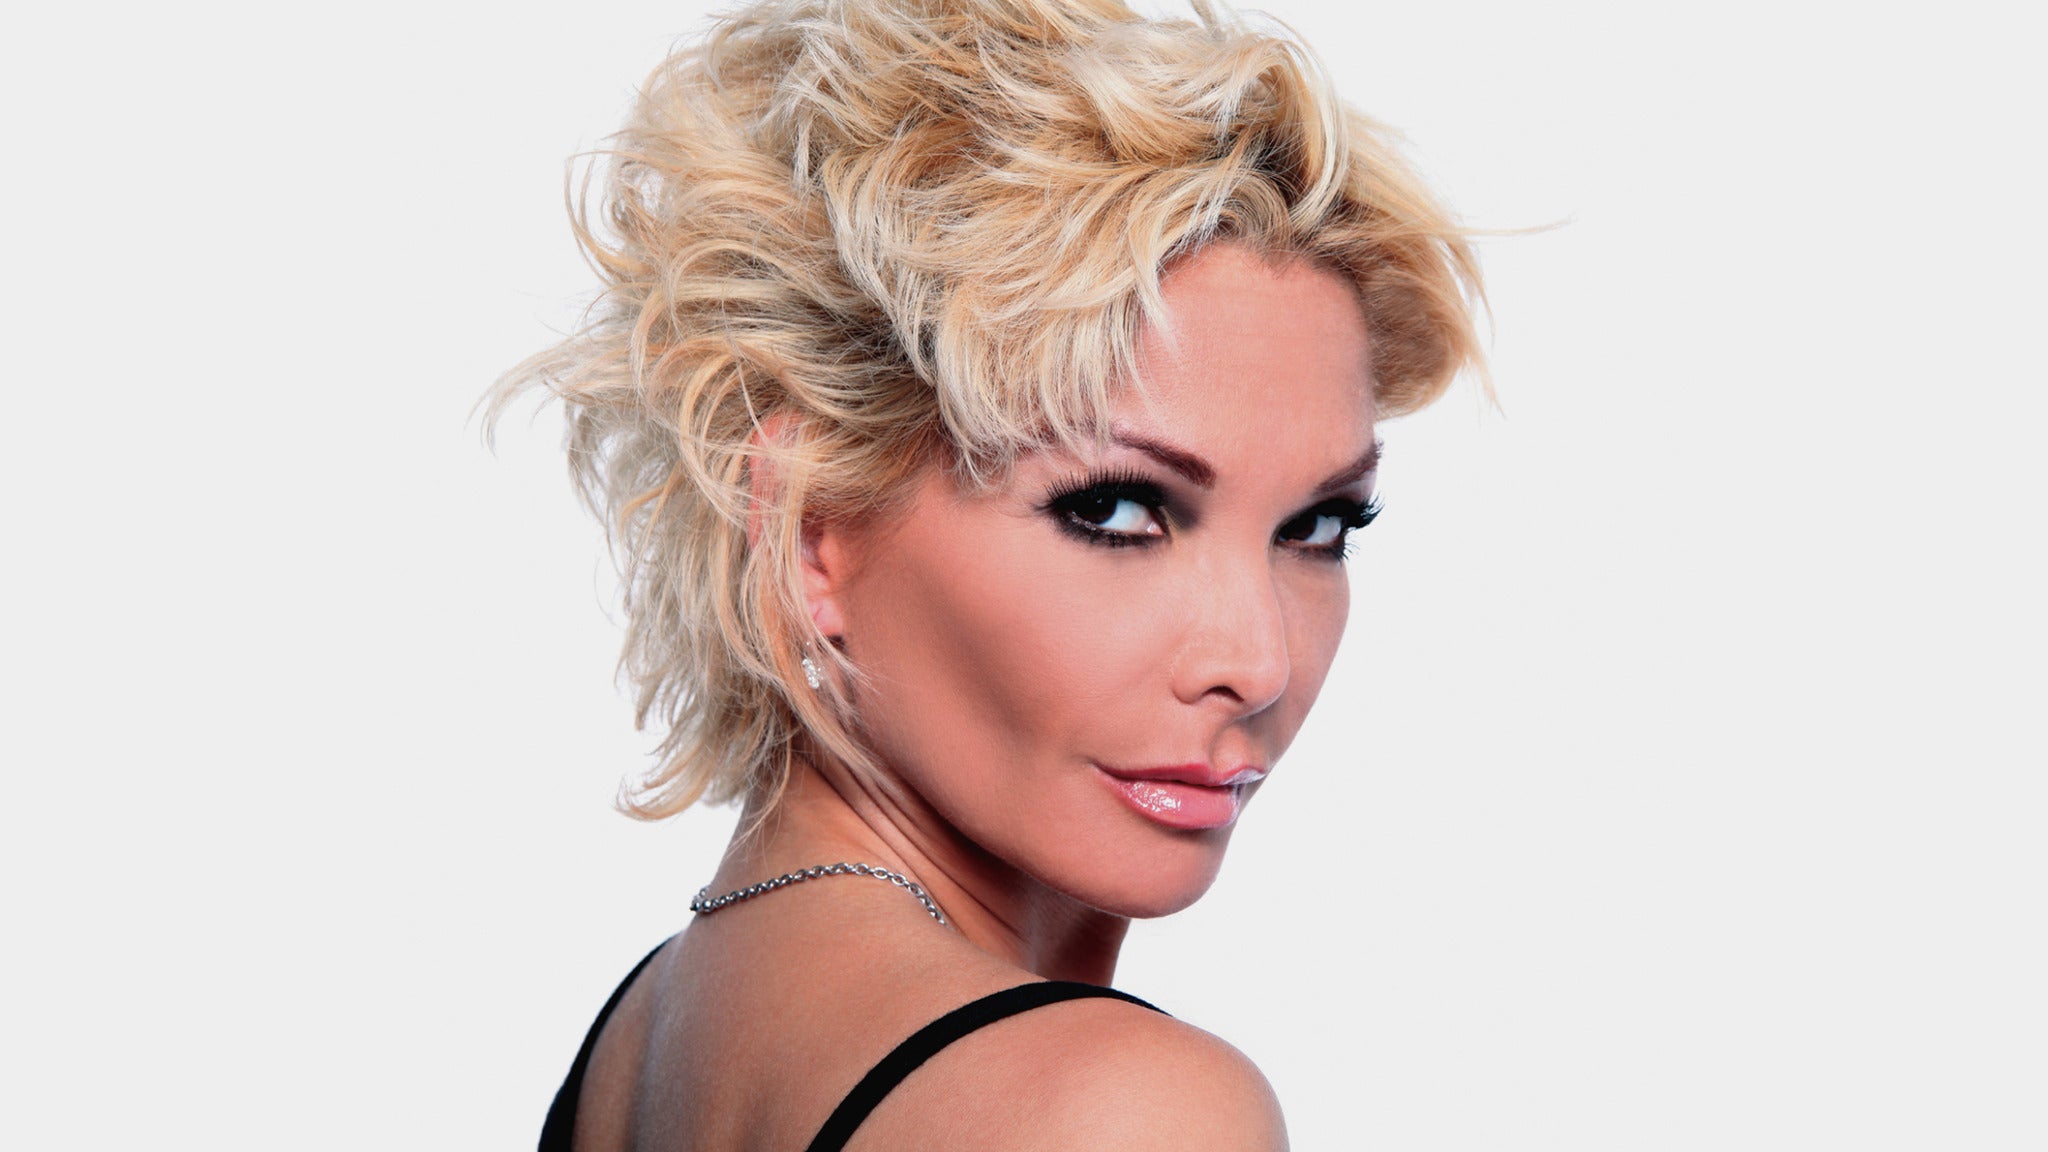 Image used with permission from Ticketmaster | Marisela tickets